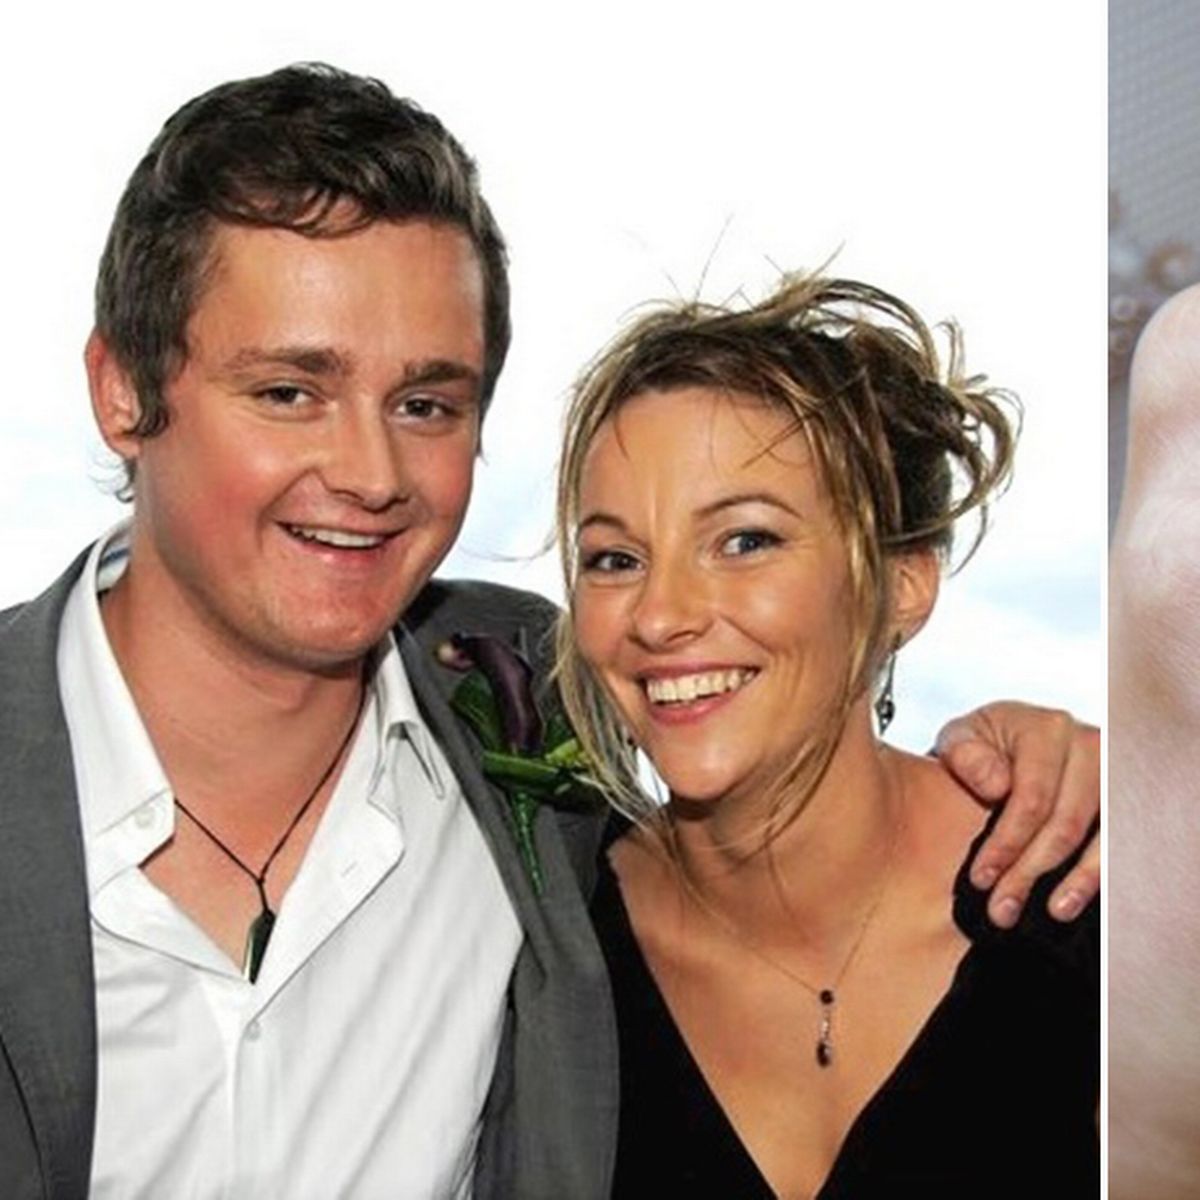 Who Is The Wife Of Tom Chaplin, Natalie Chaplin? Here's A Look At Their Relationship